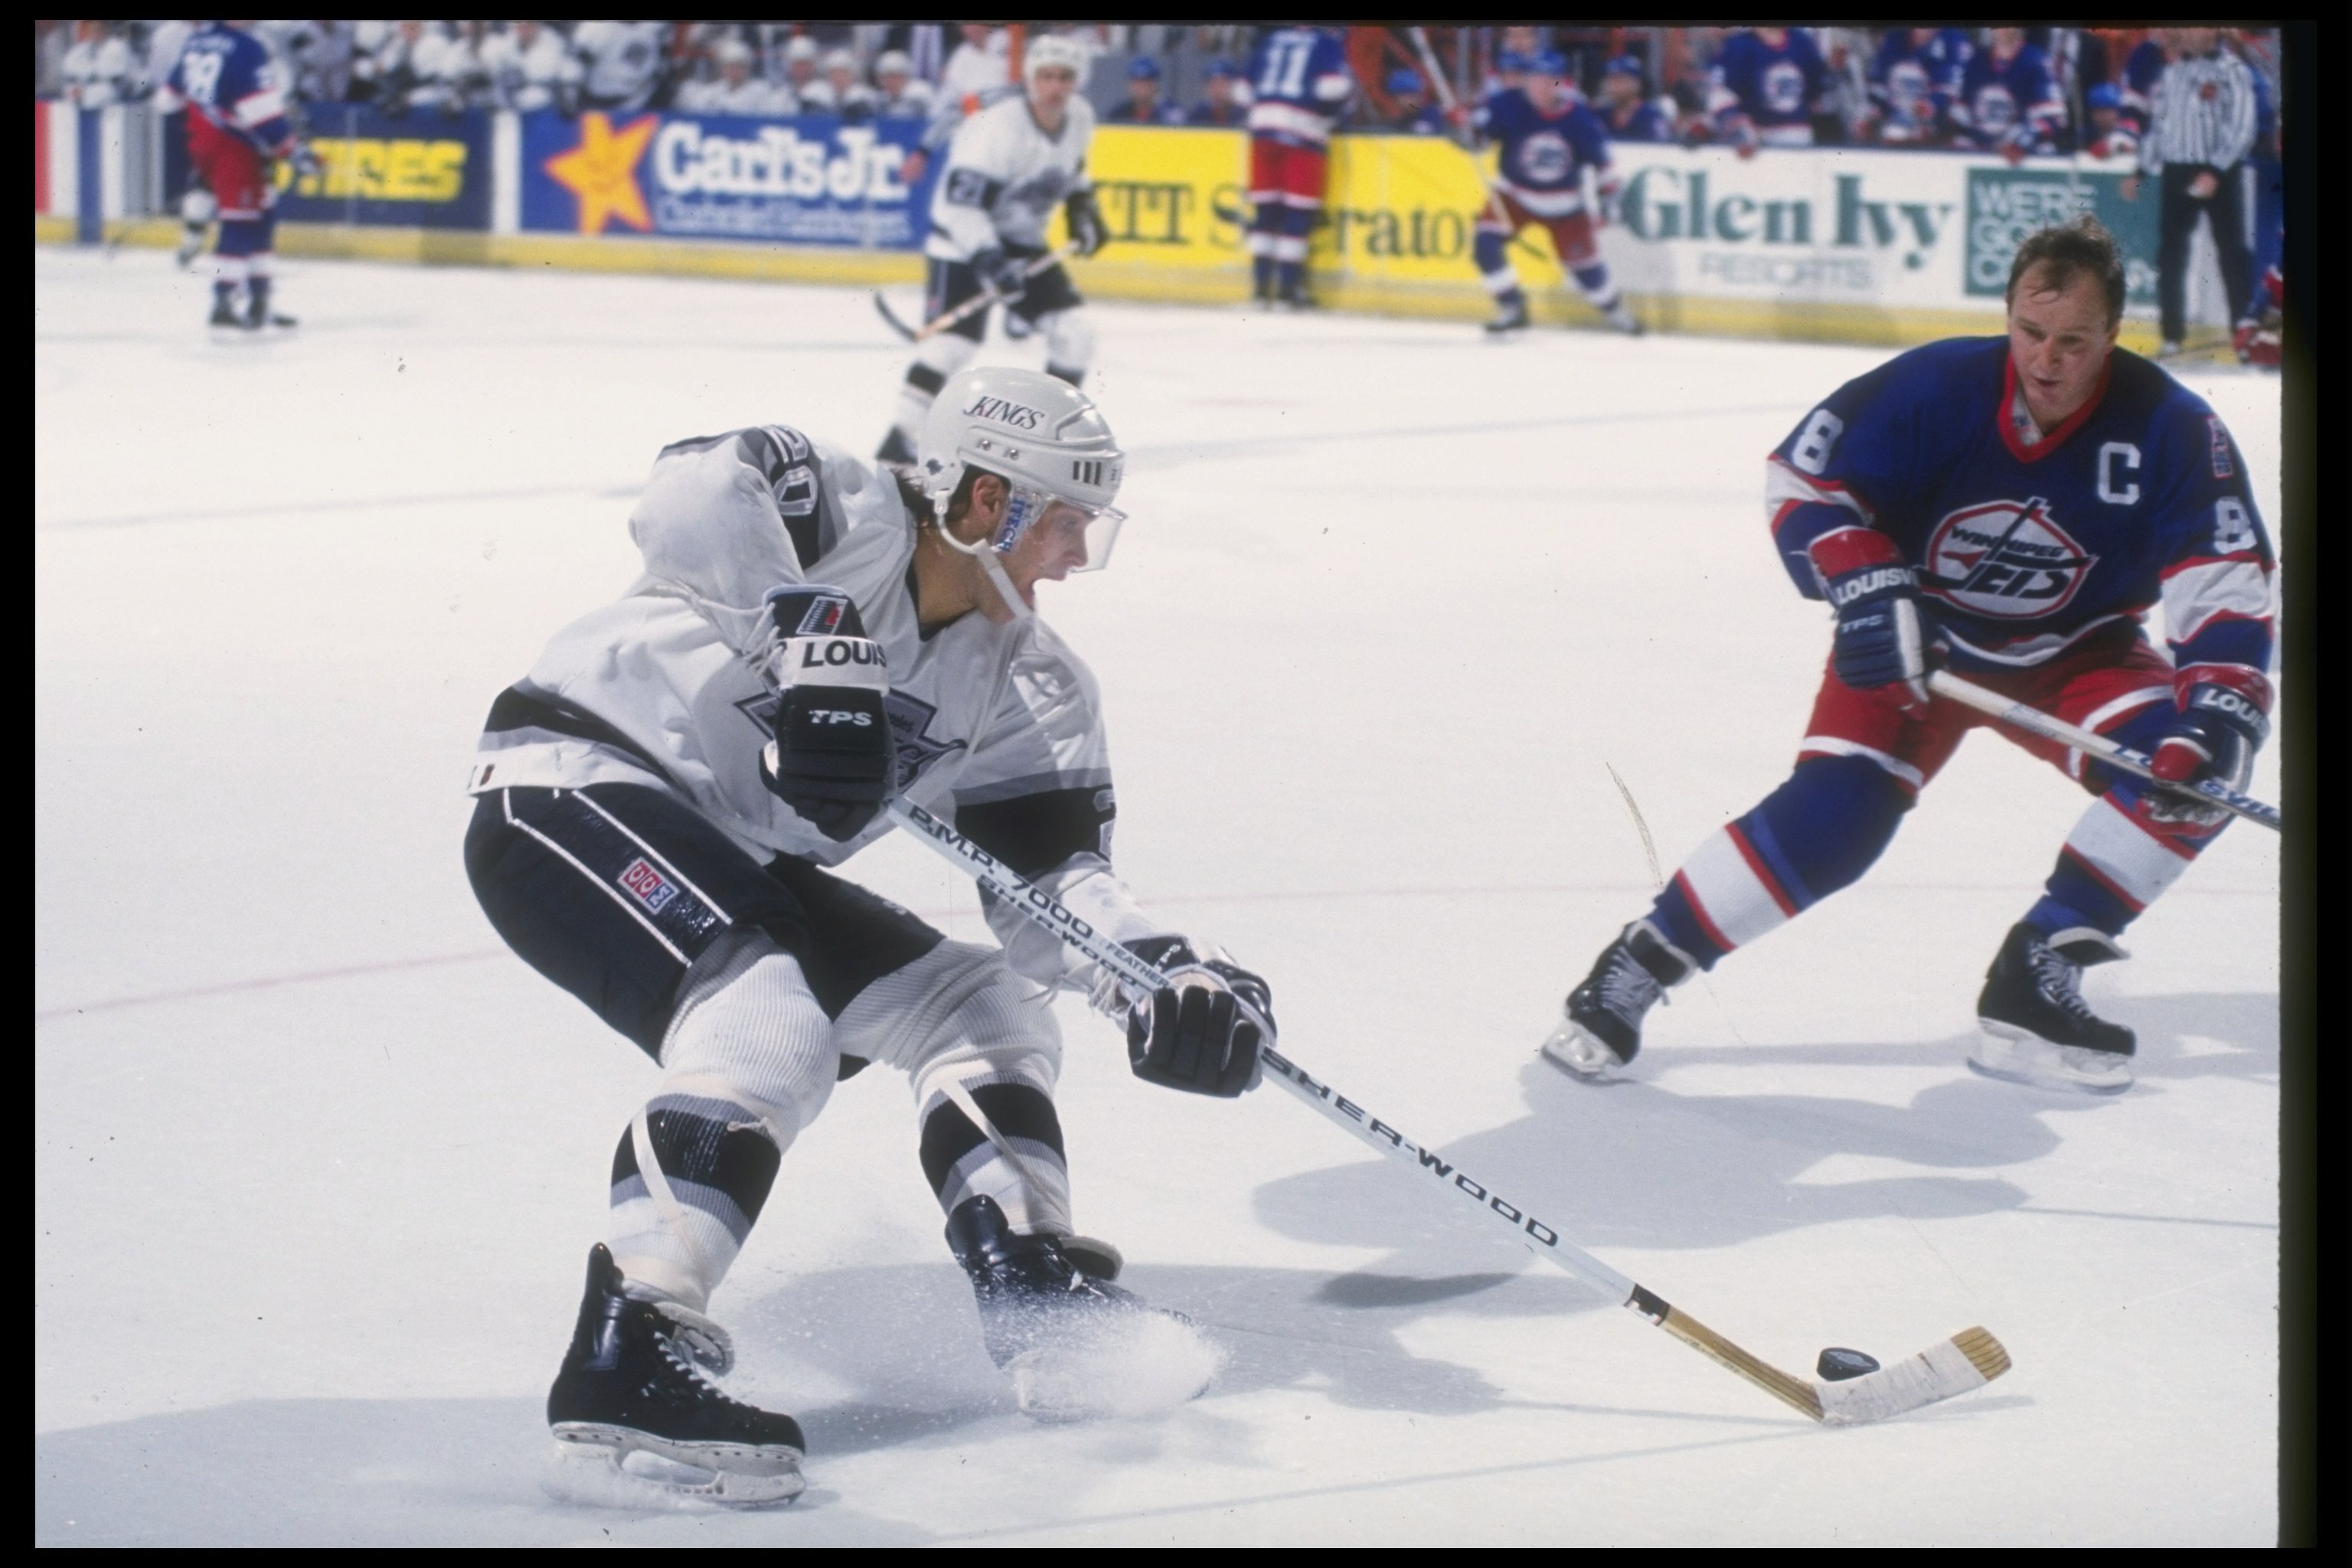 NHL99: Luc Robitaille followed his personal 'Camino' to unimaginable  heights - The Athletic